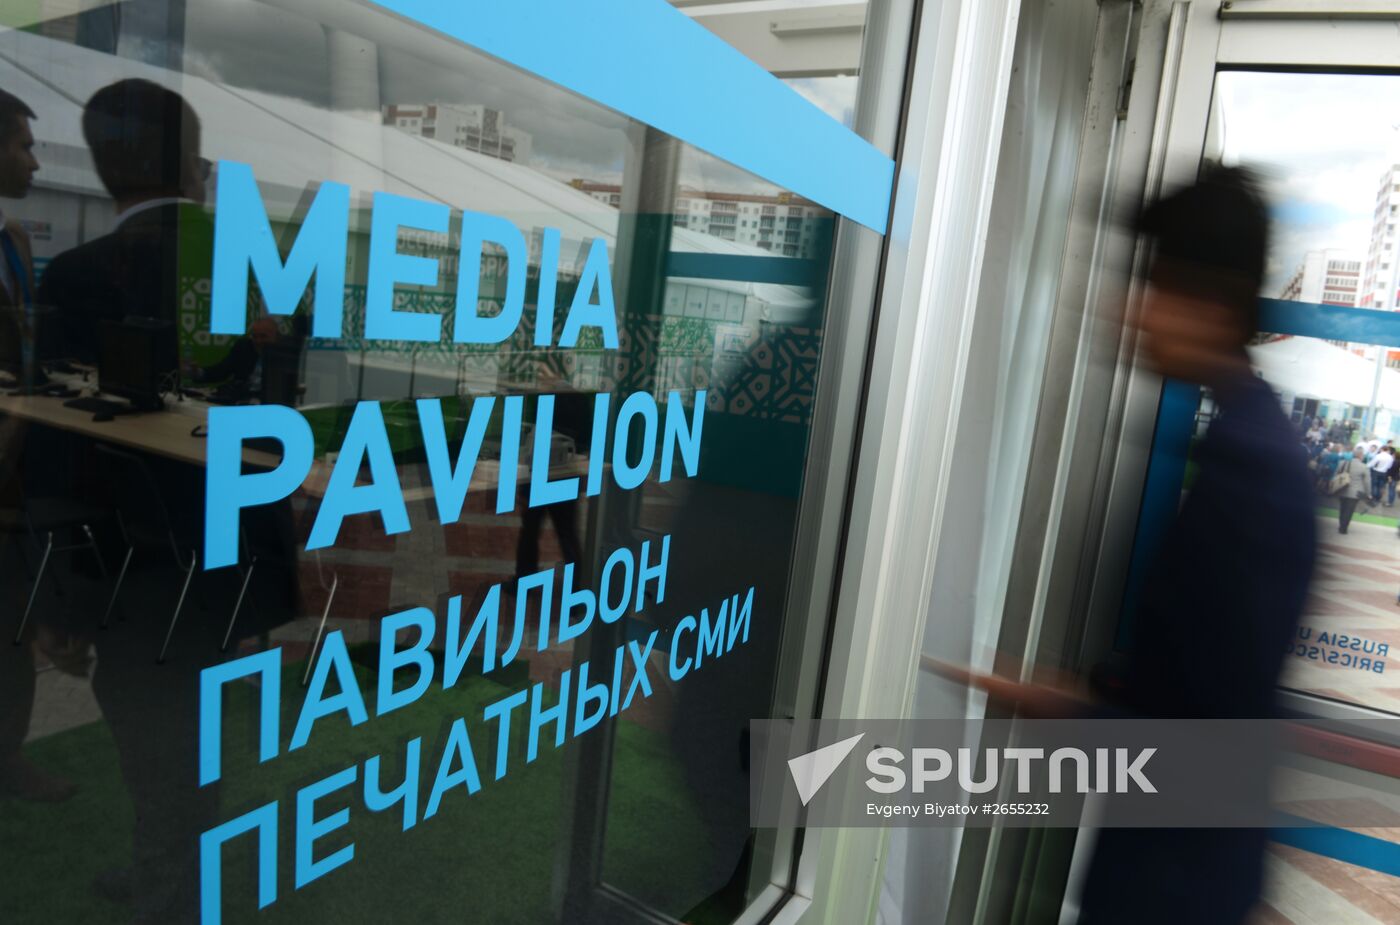 Opening of the International Media Centre in Ufa